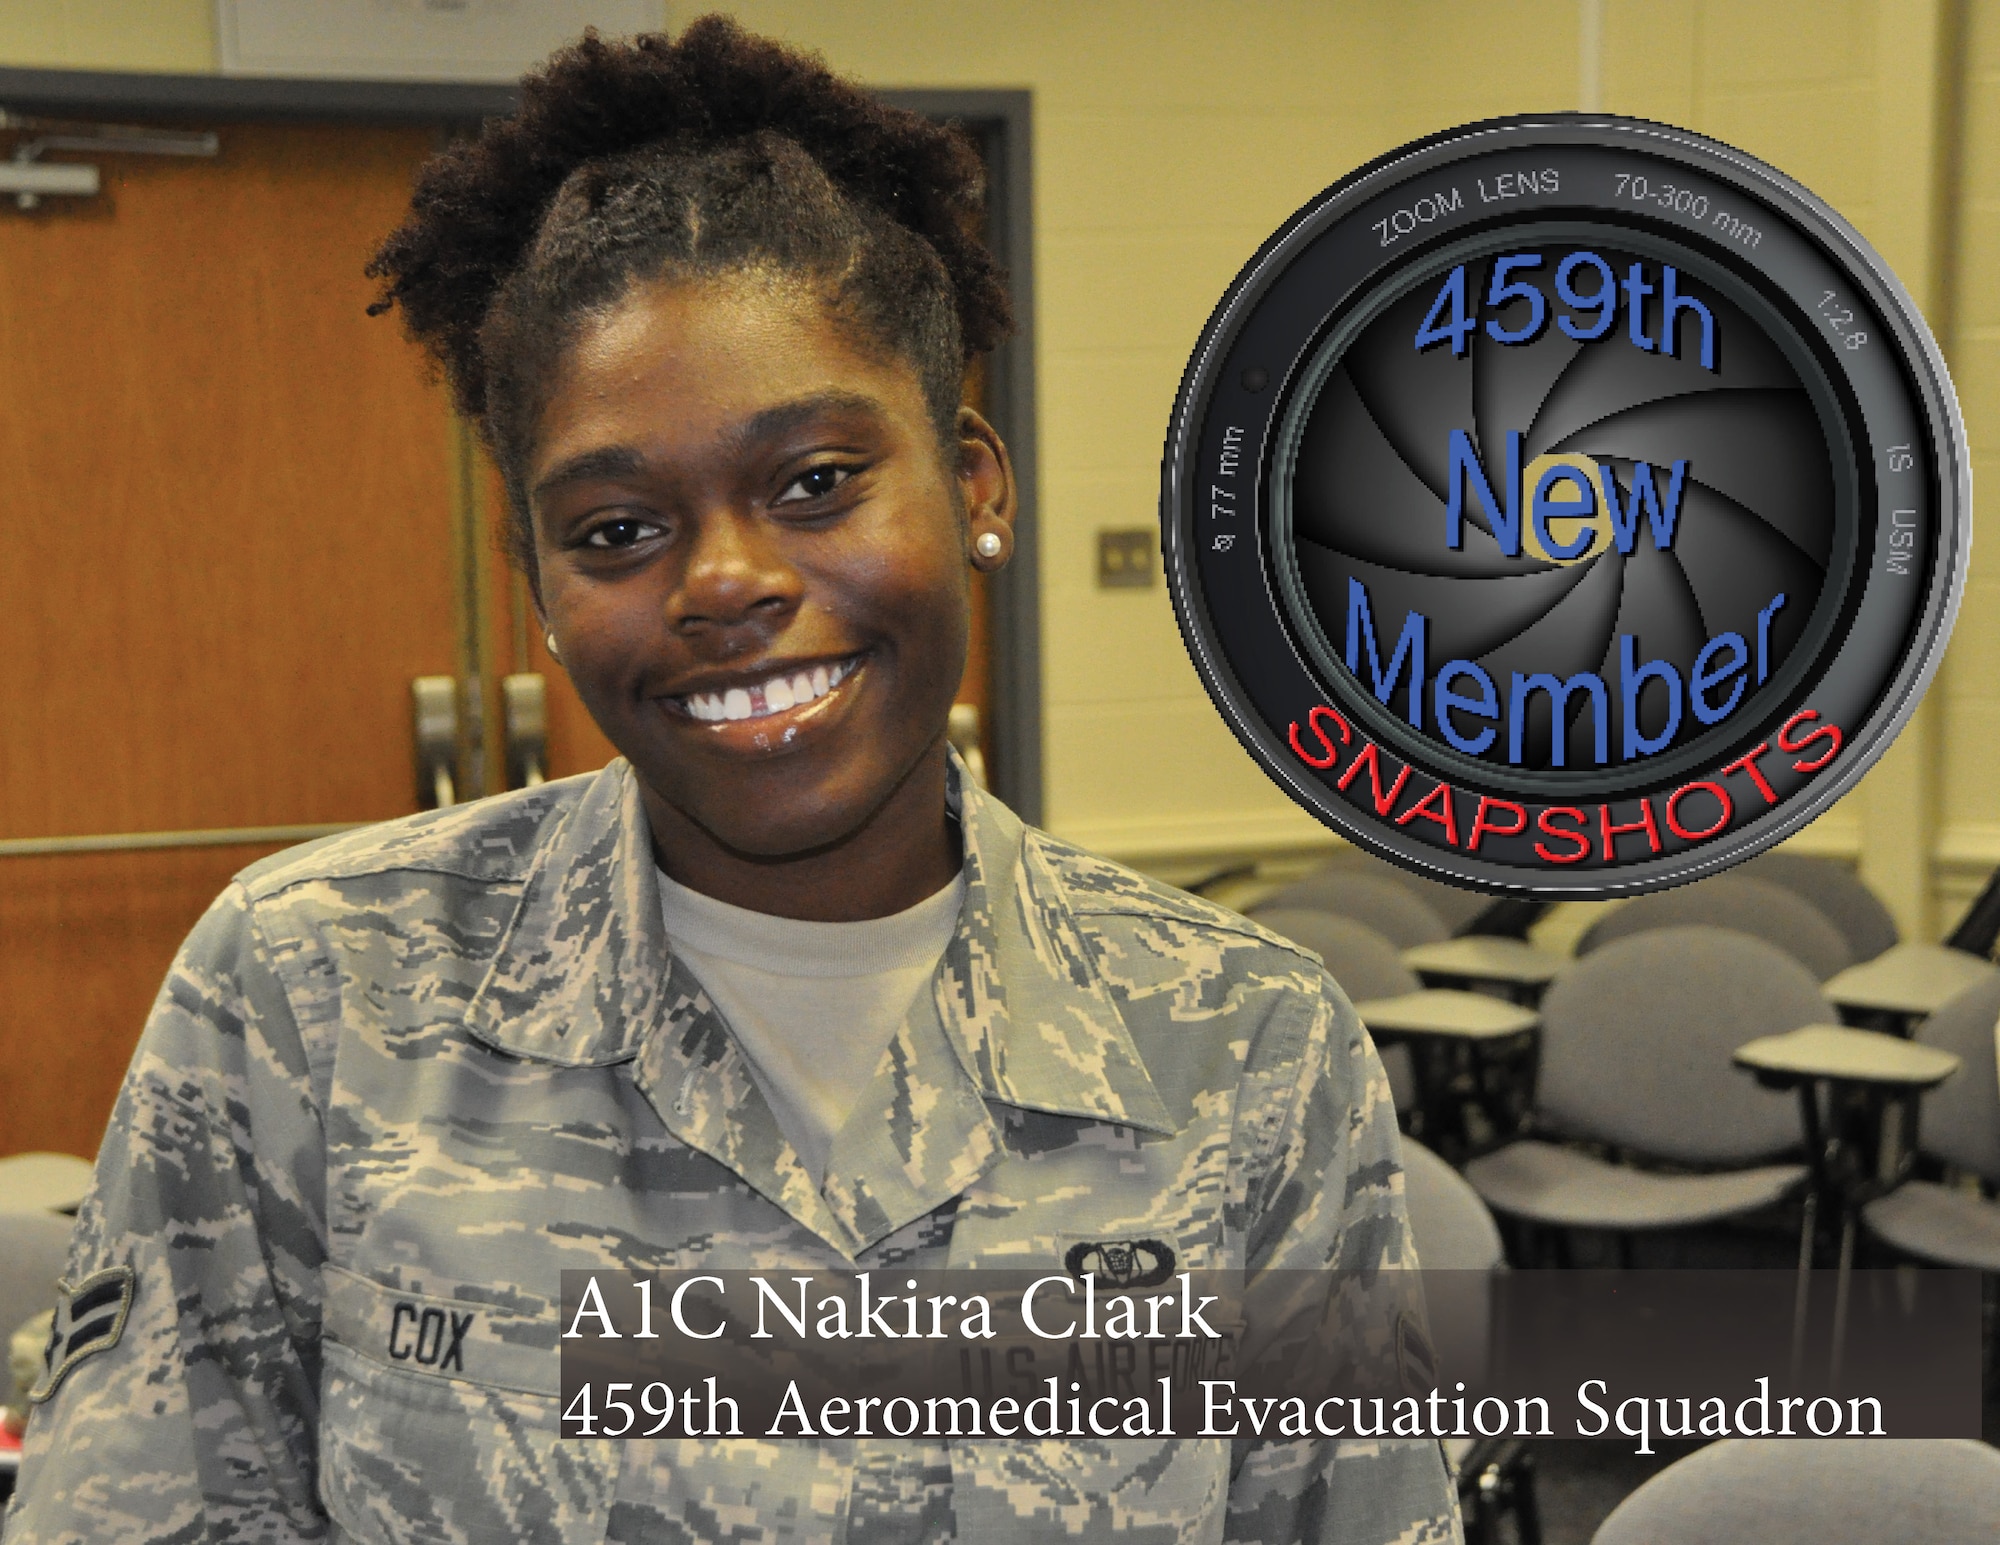 Airmen First Class Nakira Cox, Aviation resource management, 459th Aeromedical Evacuation Squadron poses for a photo at Joint Base Andrews, Md., June 6, 2015. A1C Cox is the 459th Air Refueling Wing's New Member Snapshot for the month of June. (U.S. Air Force Photo/ Tech. Sgt. Brent A. Skeen)